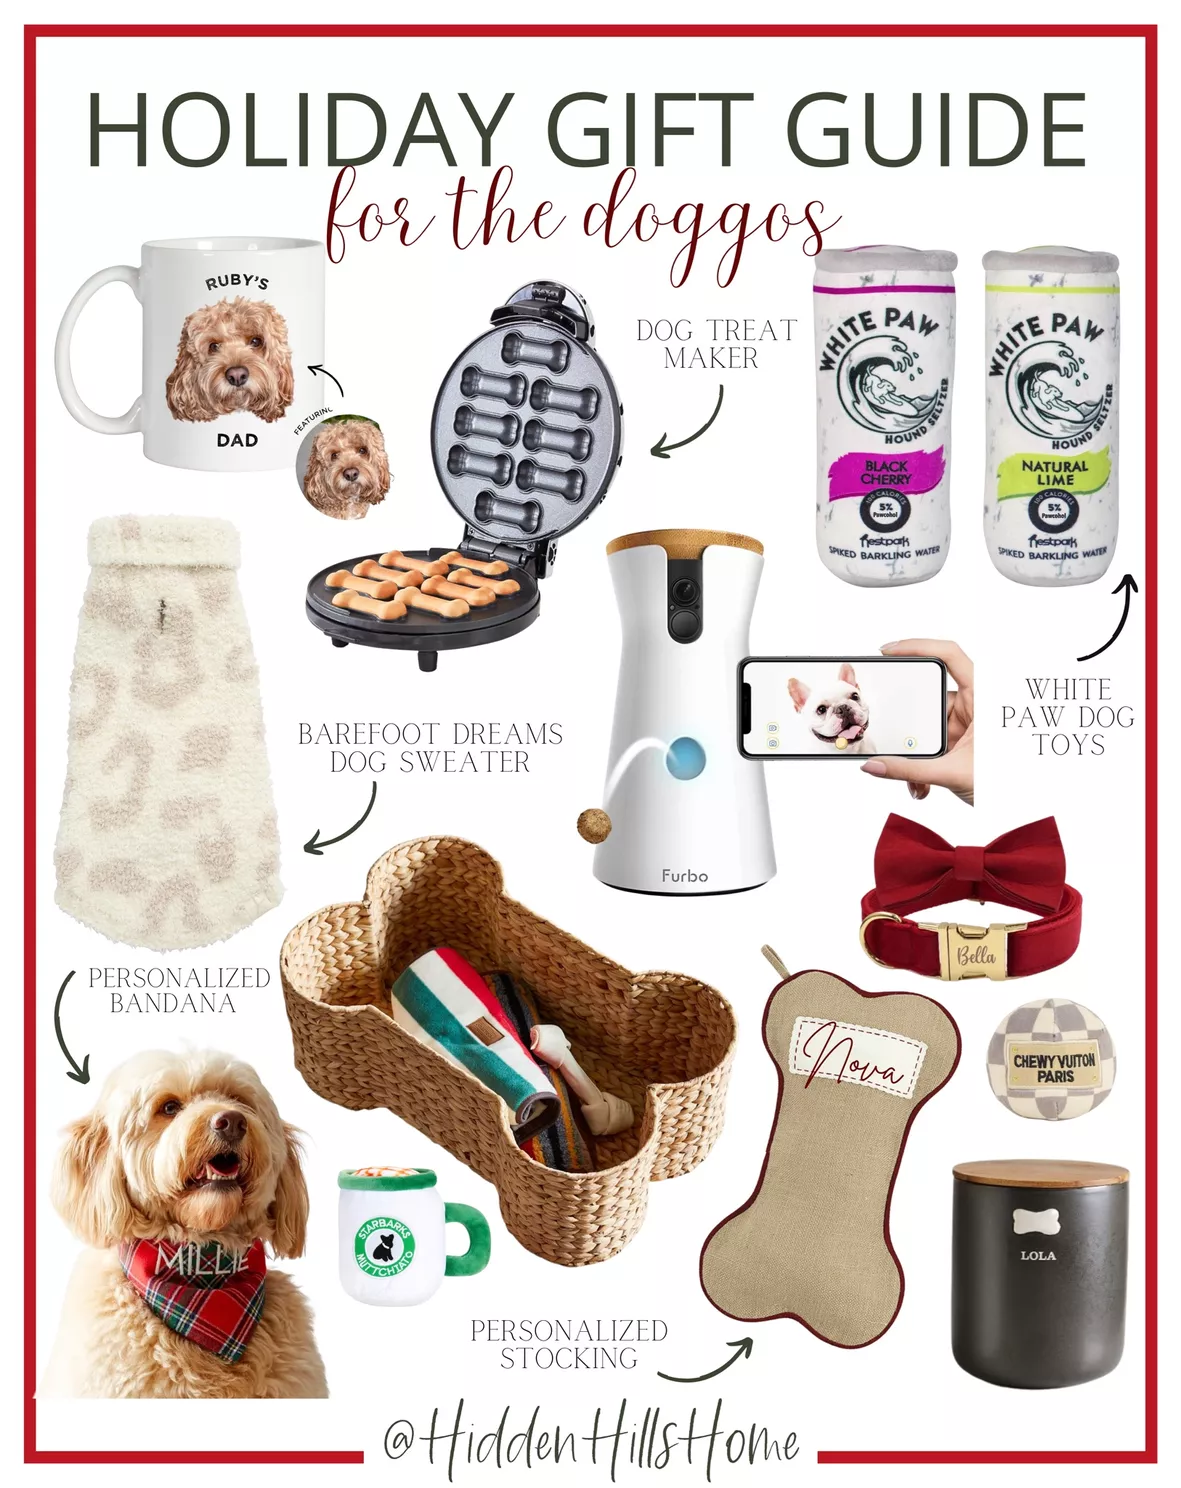 Pet Christmas gift guide: The best festive presents, outfits and